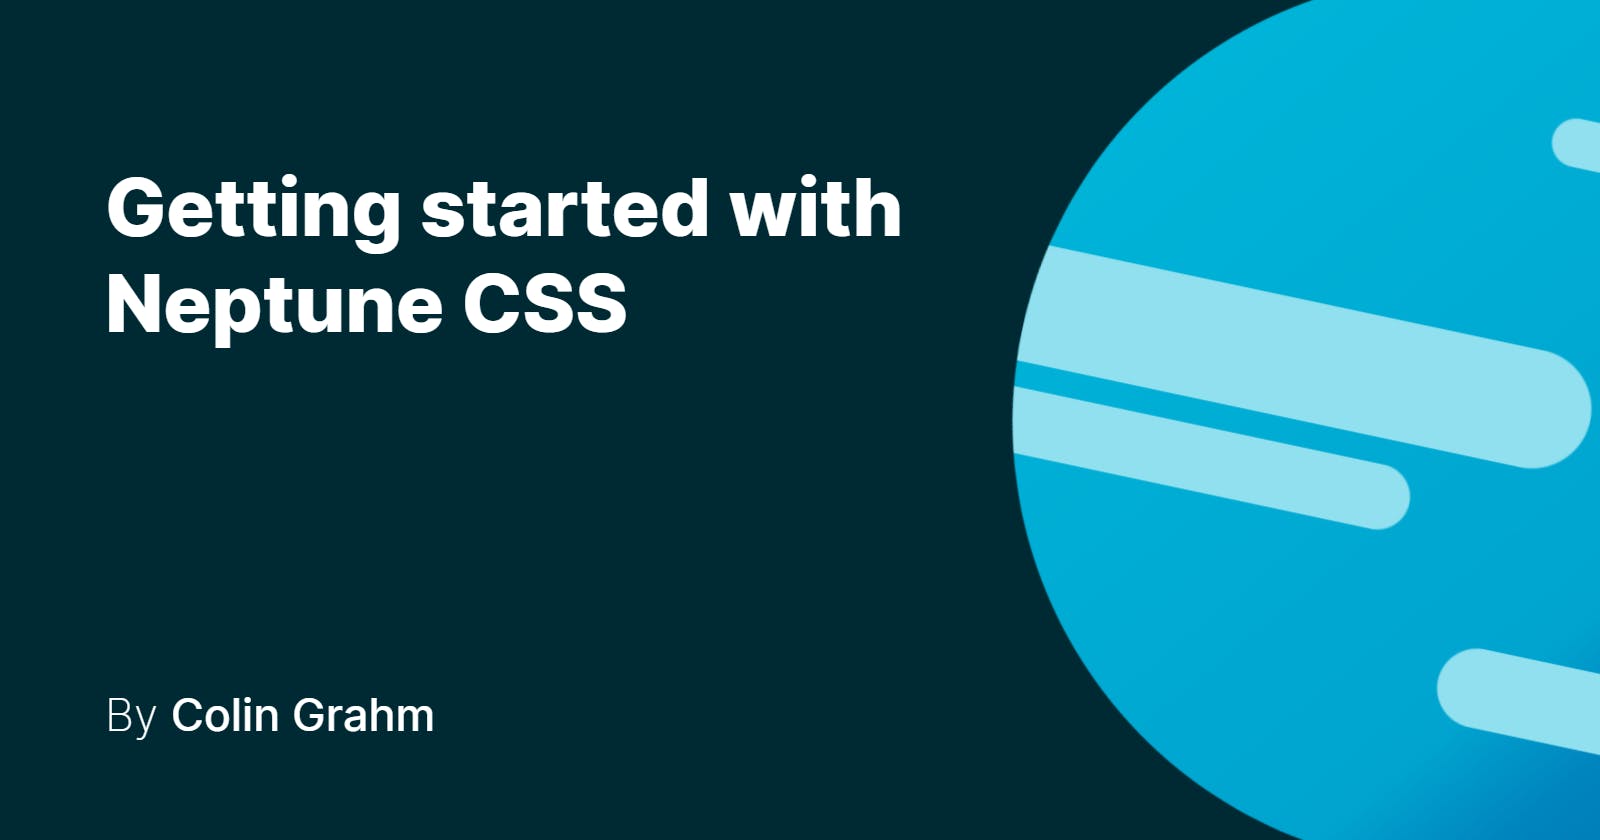 Getting started with Neptune CSS